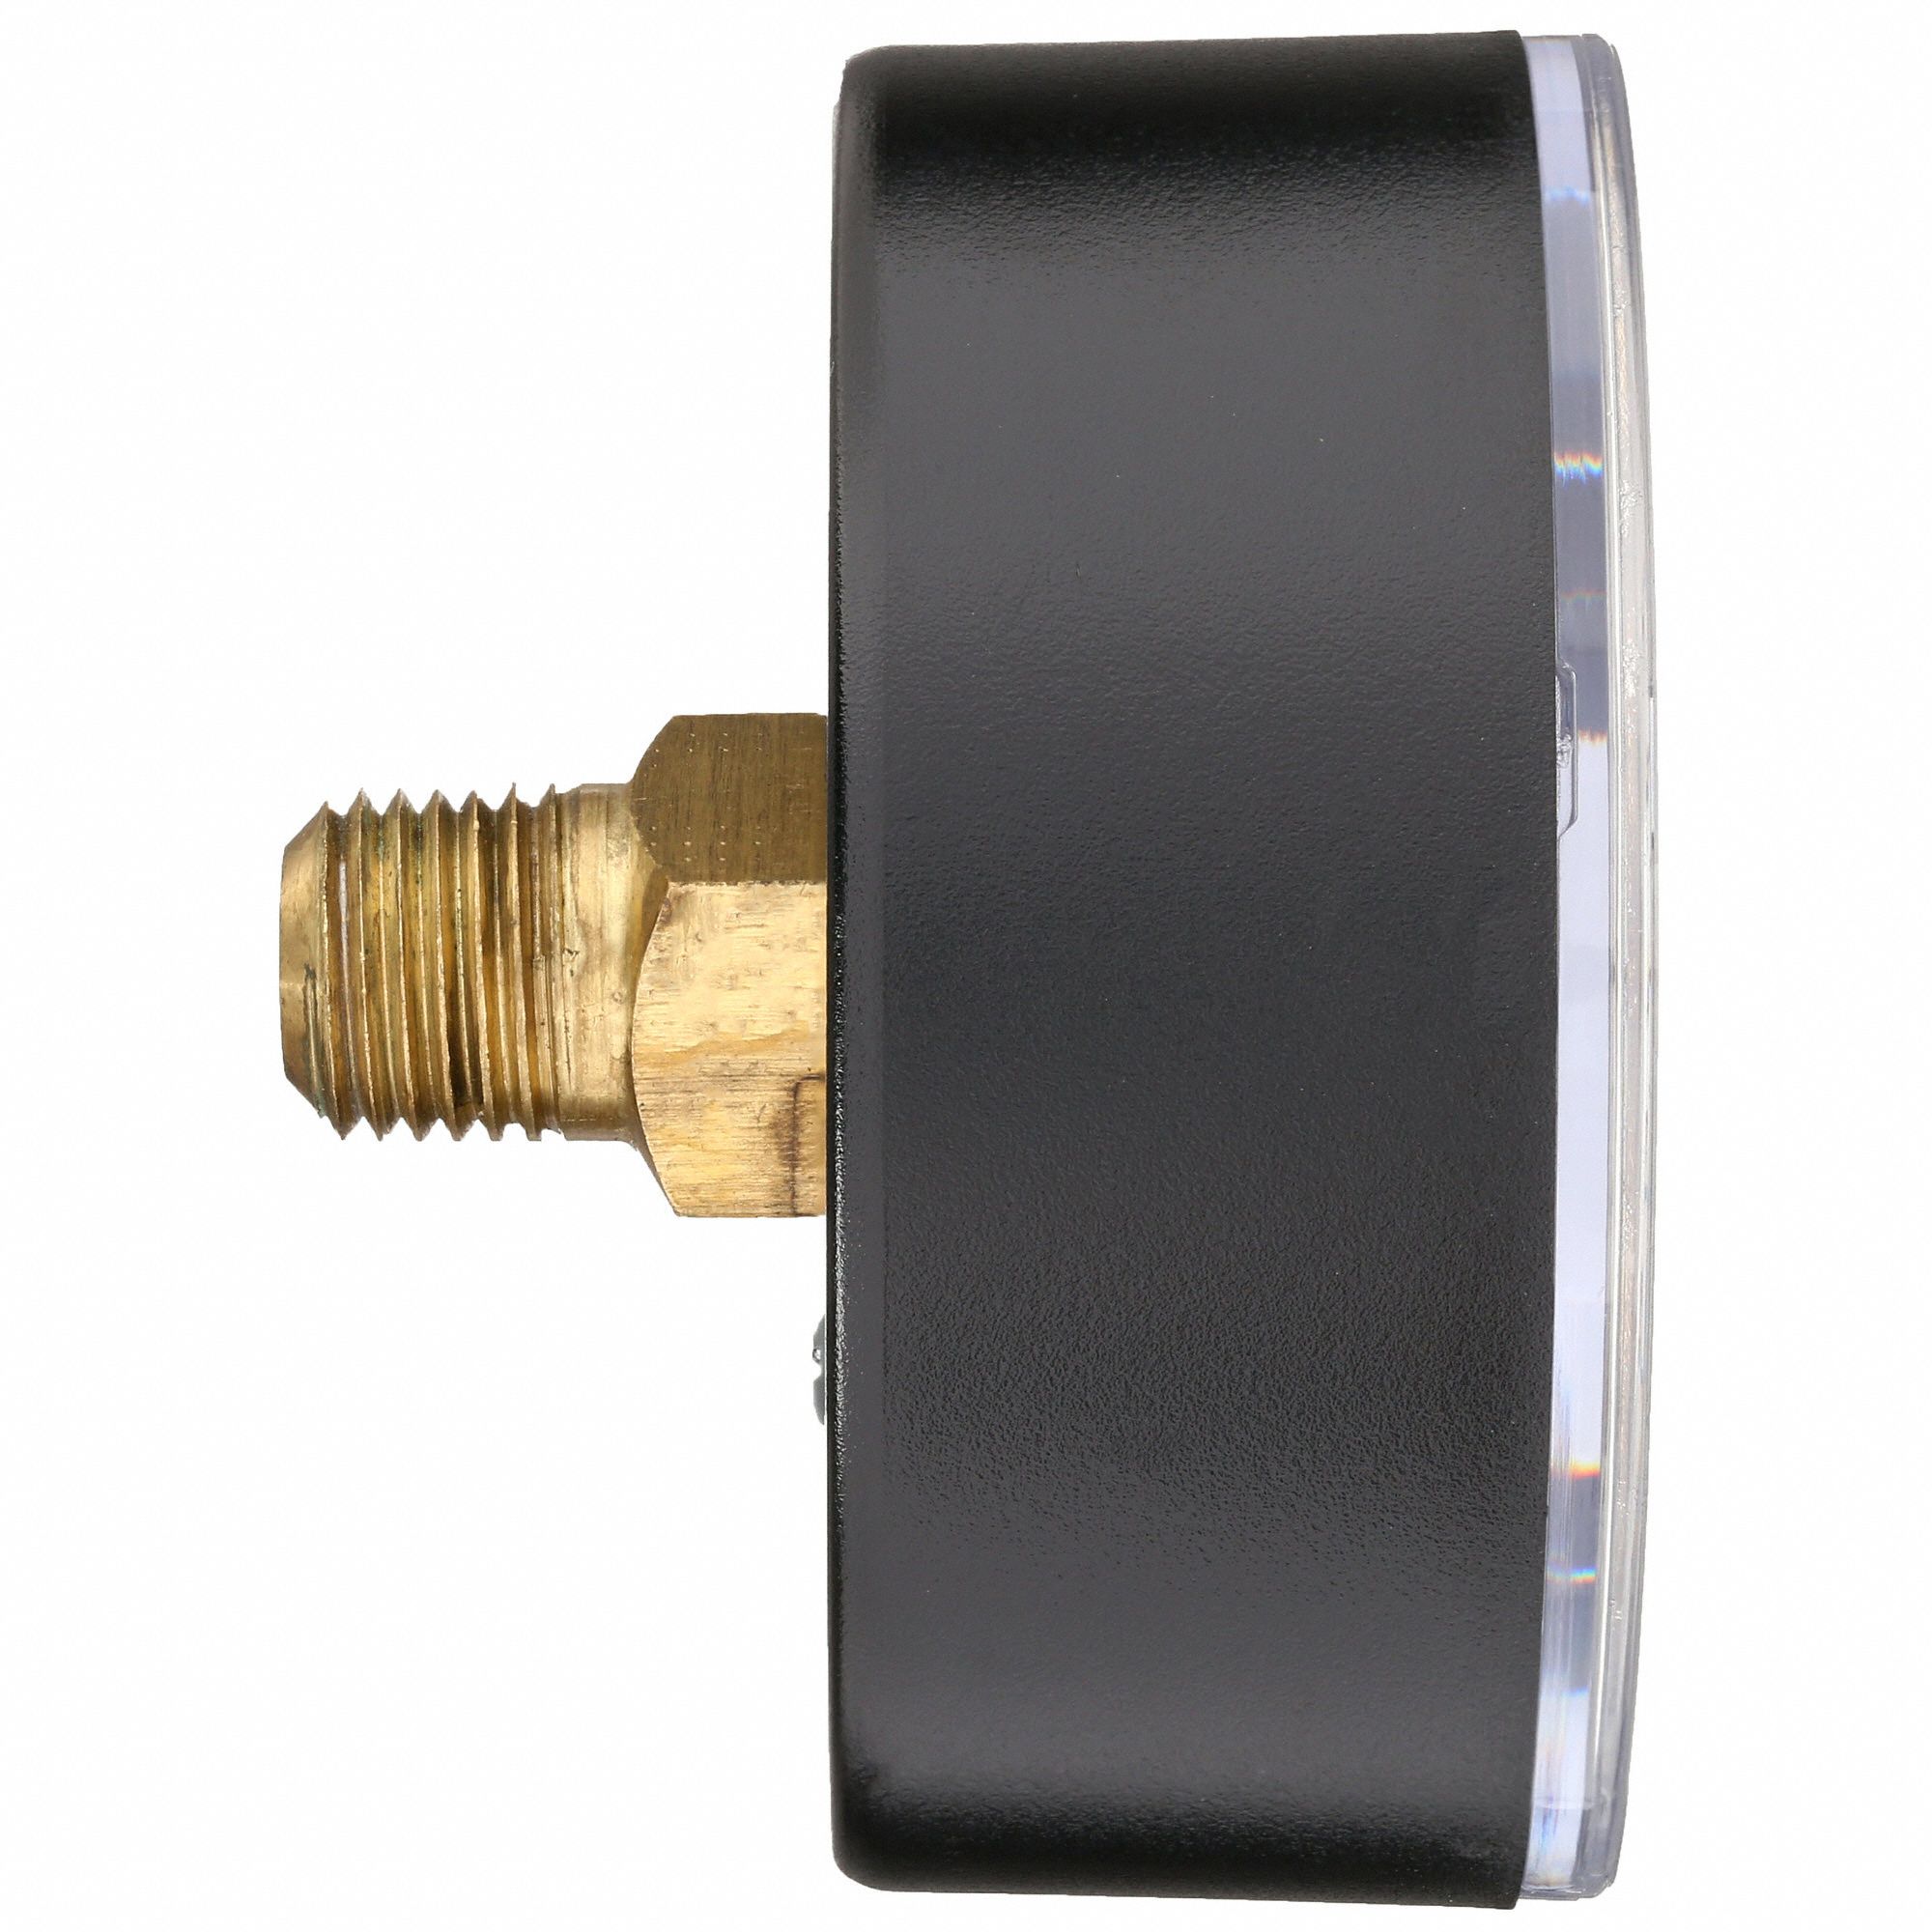 Back Connection 1 1/2 Dial Cole-Parmer 15-W-1005-P-H-01B-200# Ashcroft 1005PH1.5 0 to 200 psi Utility Gauge 1 1/2 Dial 